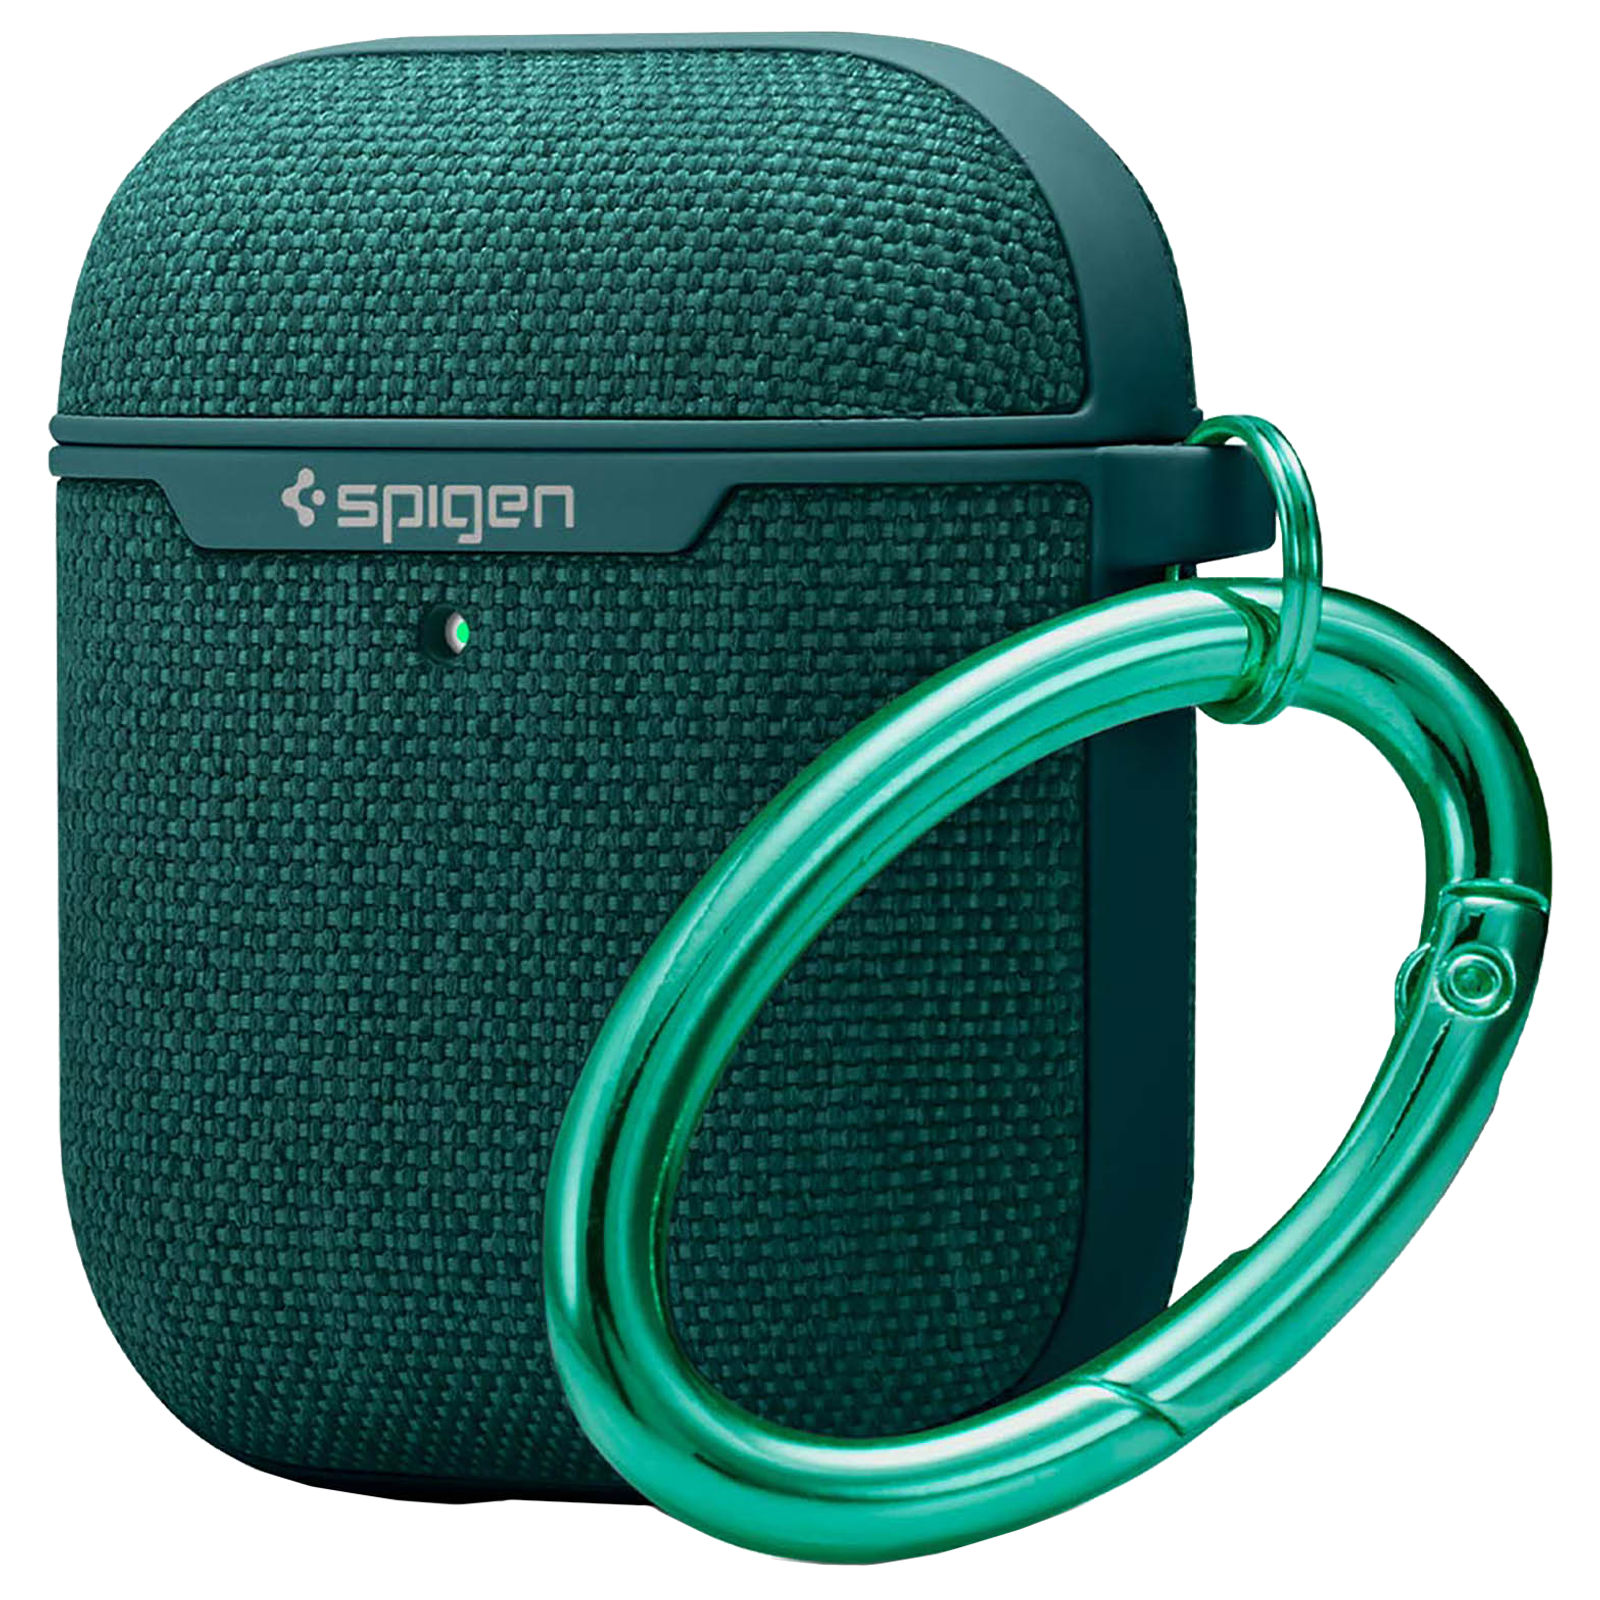 Spigen Urban Fit PC & Fabric Full Cover Case For Airpods 1/Airpods 2 (Scratch Protection, ASD00678, Midnight Green)_1